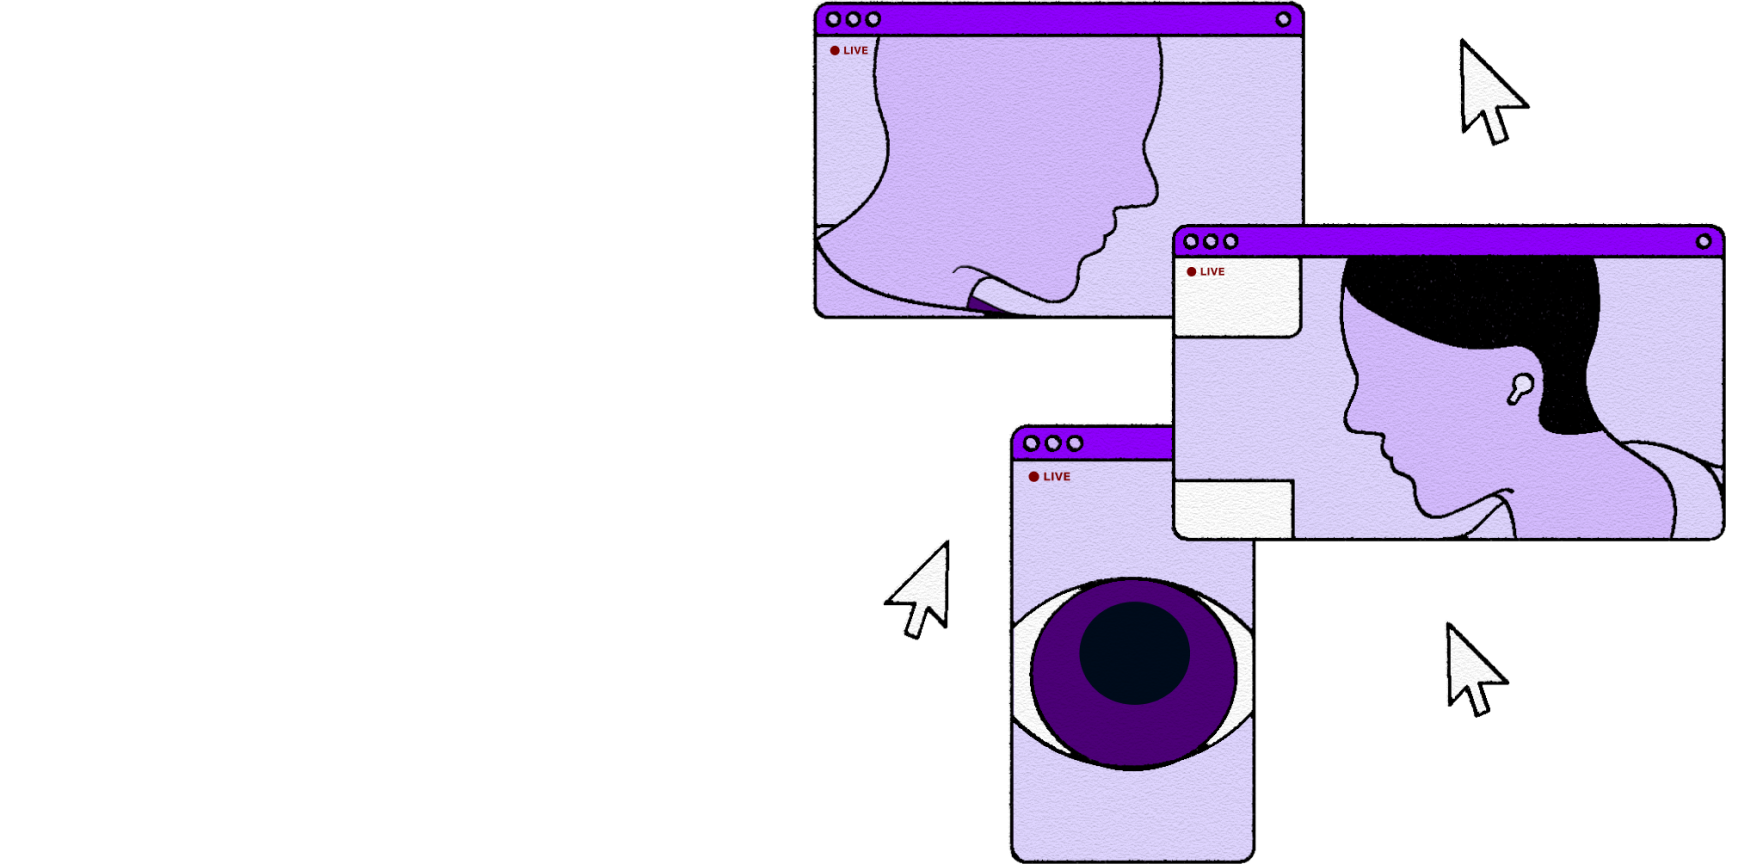 image of purple windows depicting a zoom or online call - two of which showing heads in profile, and one showing an eye.